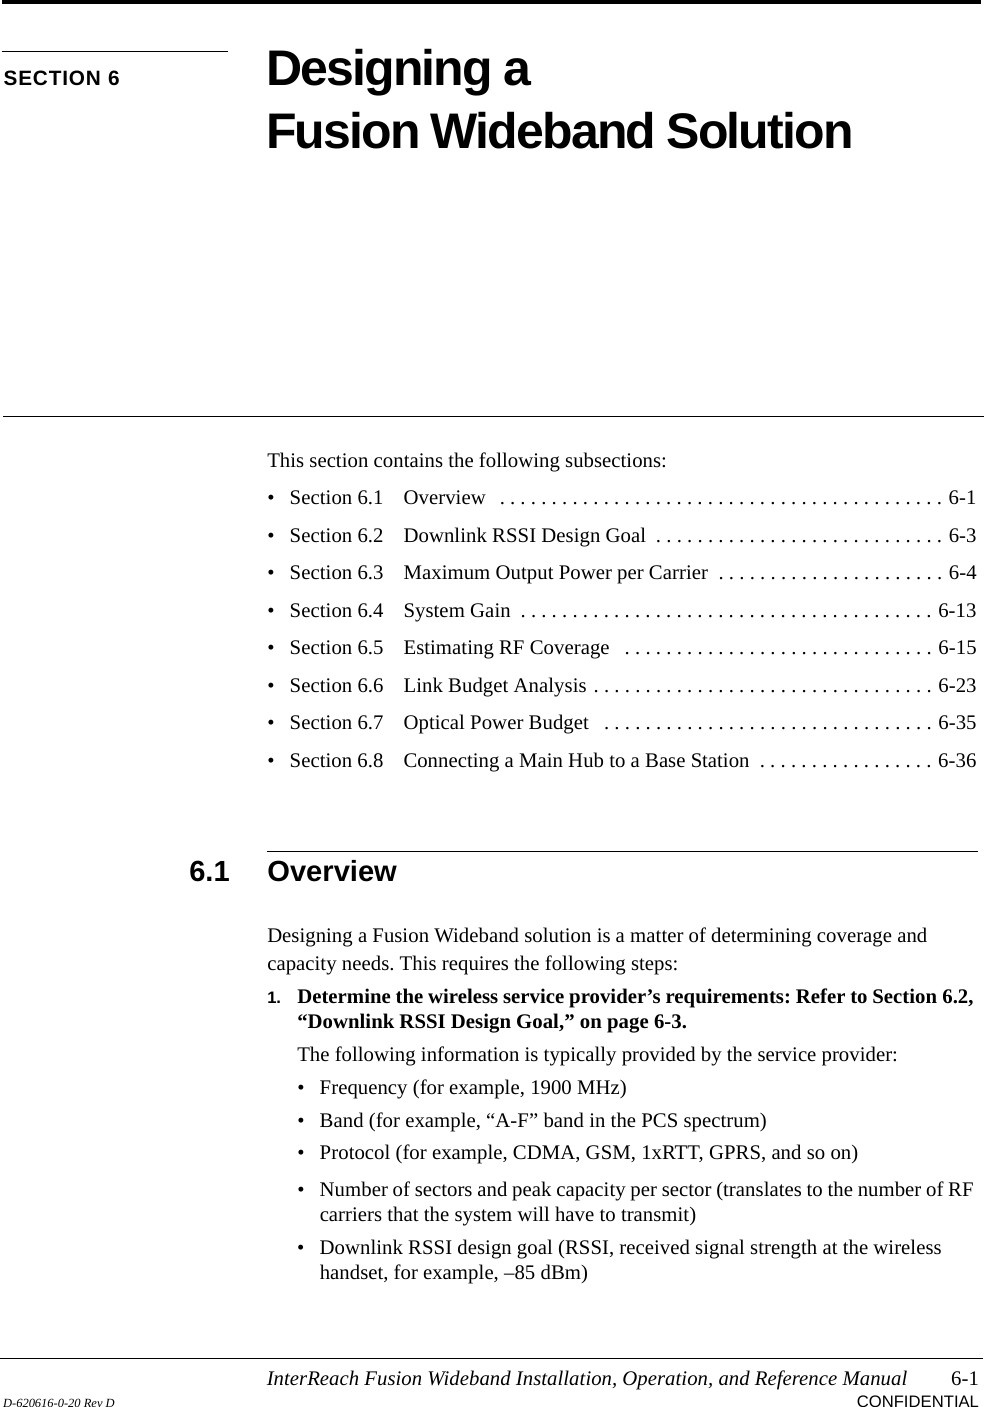 InterReach Fusion Wideband Installation, Operation, and Reference Manual 6-1D-620616-0-20 Rev D CONFIDENTIALSECTION 6 Designing a Fusion Wideband SolutionThis section contains the following subsections:• Section 6.1   Overview   . . . . . . . . . . . . . . . . . . . . . . . . . . . . . . . . . . . . . . . . . . . 6-1• Section 6.2   Downlink RSSI Design Goal  . . . . . . . . . . . . . . . . . . . . . . . . . . . . 6-3• Section 6.3   Maximum Output Power per Carrier  . . . . . . . . . . . . . . . . . . . . . . 6-4• Section 6.4   System Gain  . . . . . . . . . . . . . . . . . . . . . . . . . . . . . . . . . . . . . . . . 6-13• Section 6.5   Estimating RF Coverage   . . . . . . . . . . . . . . . . . . . . . . . . . . . . . . 6-15• Section 6.6   Link Budget Analysis . . . . . . . . . . . . . . . . . . . . . . . . . . . . . . . . . 6-23• Section 6.7   Optical Power Budget   . . . . . . . . . . . . . . . . . . . . . . . . . . . . . . . . 6-35• Section 6.8   Connecting a Main Hub to a Base Station  . . . . . . . . . . . . . . . . . 6-366.1 OverviewDesigning a Fusion Wideband solution is a matter of determining coverage and capacity needs. This requires the following steps:1. Determine the wireless service provider’s requirements: Refer to Section 6.2, “Downlink RSSI Design Goal,” on page 6-3.The following information is typically provided by the service provider:• Frequency (for example, 1900 MHz)• Band (for example, “A-F” band in the PCS spectrum)• Protocol (for example, CDMA, GSM, 1xRTT, GPRS, and so on)• Number of sectors and peak capacity per sector (translates to the number of RF carriers that the system will have to transmit)• Downlink RSSI design goal (RSSI, received signal strength at the wireless handset, for example, –85 dBm)